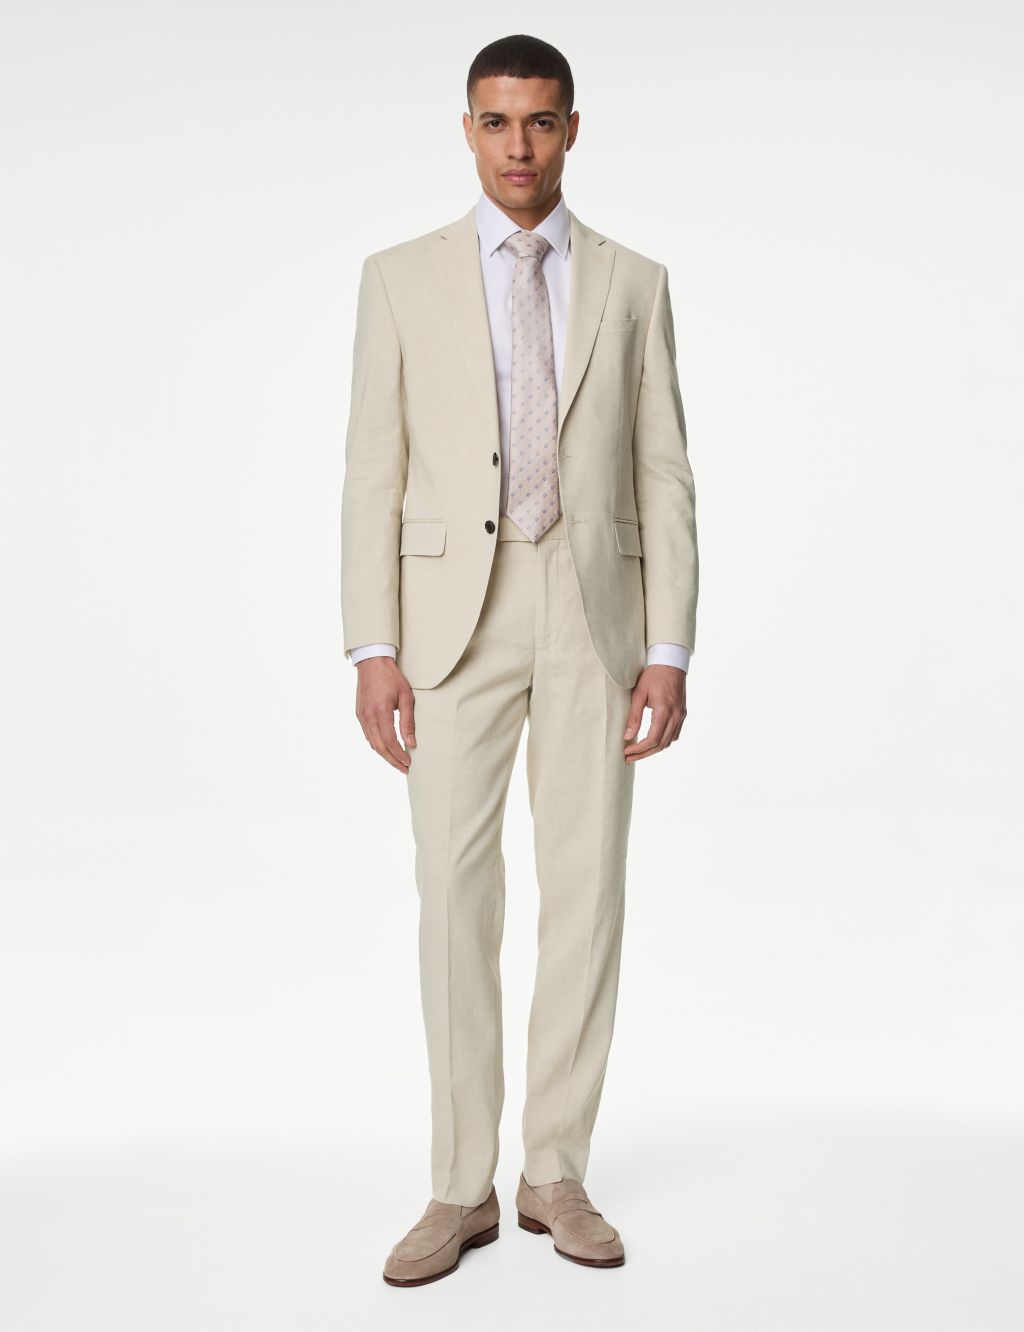 Tailored Fit Italian Linen Miracle™ Suit Jacket image 5